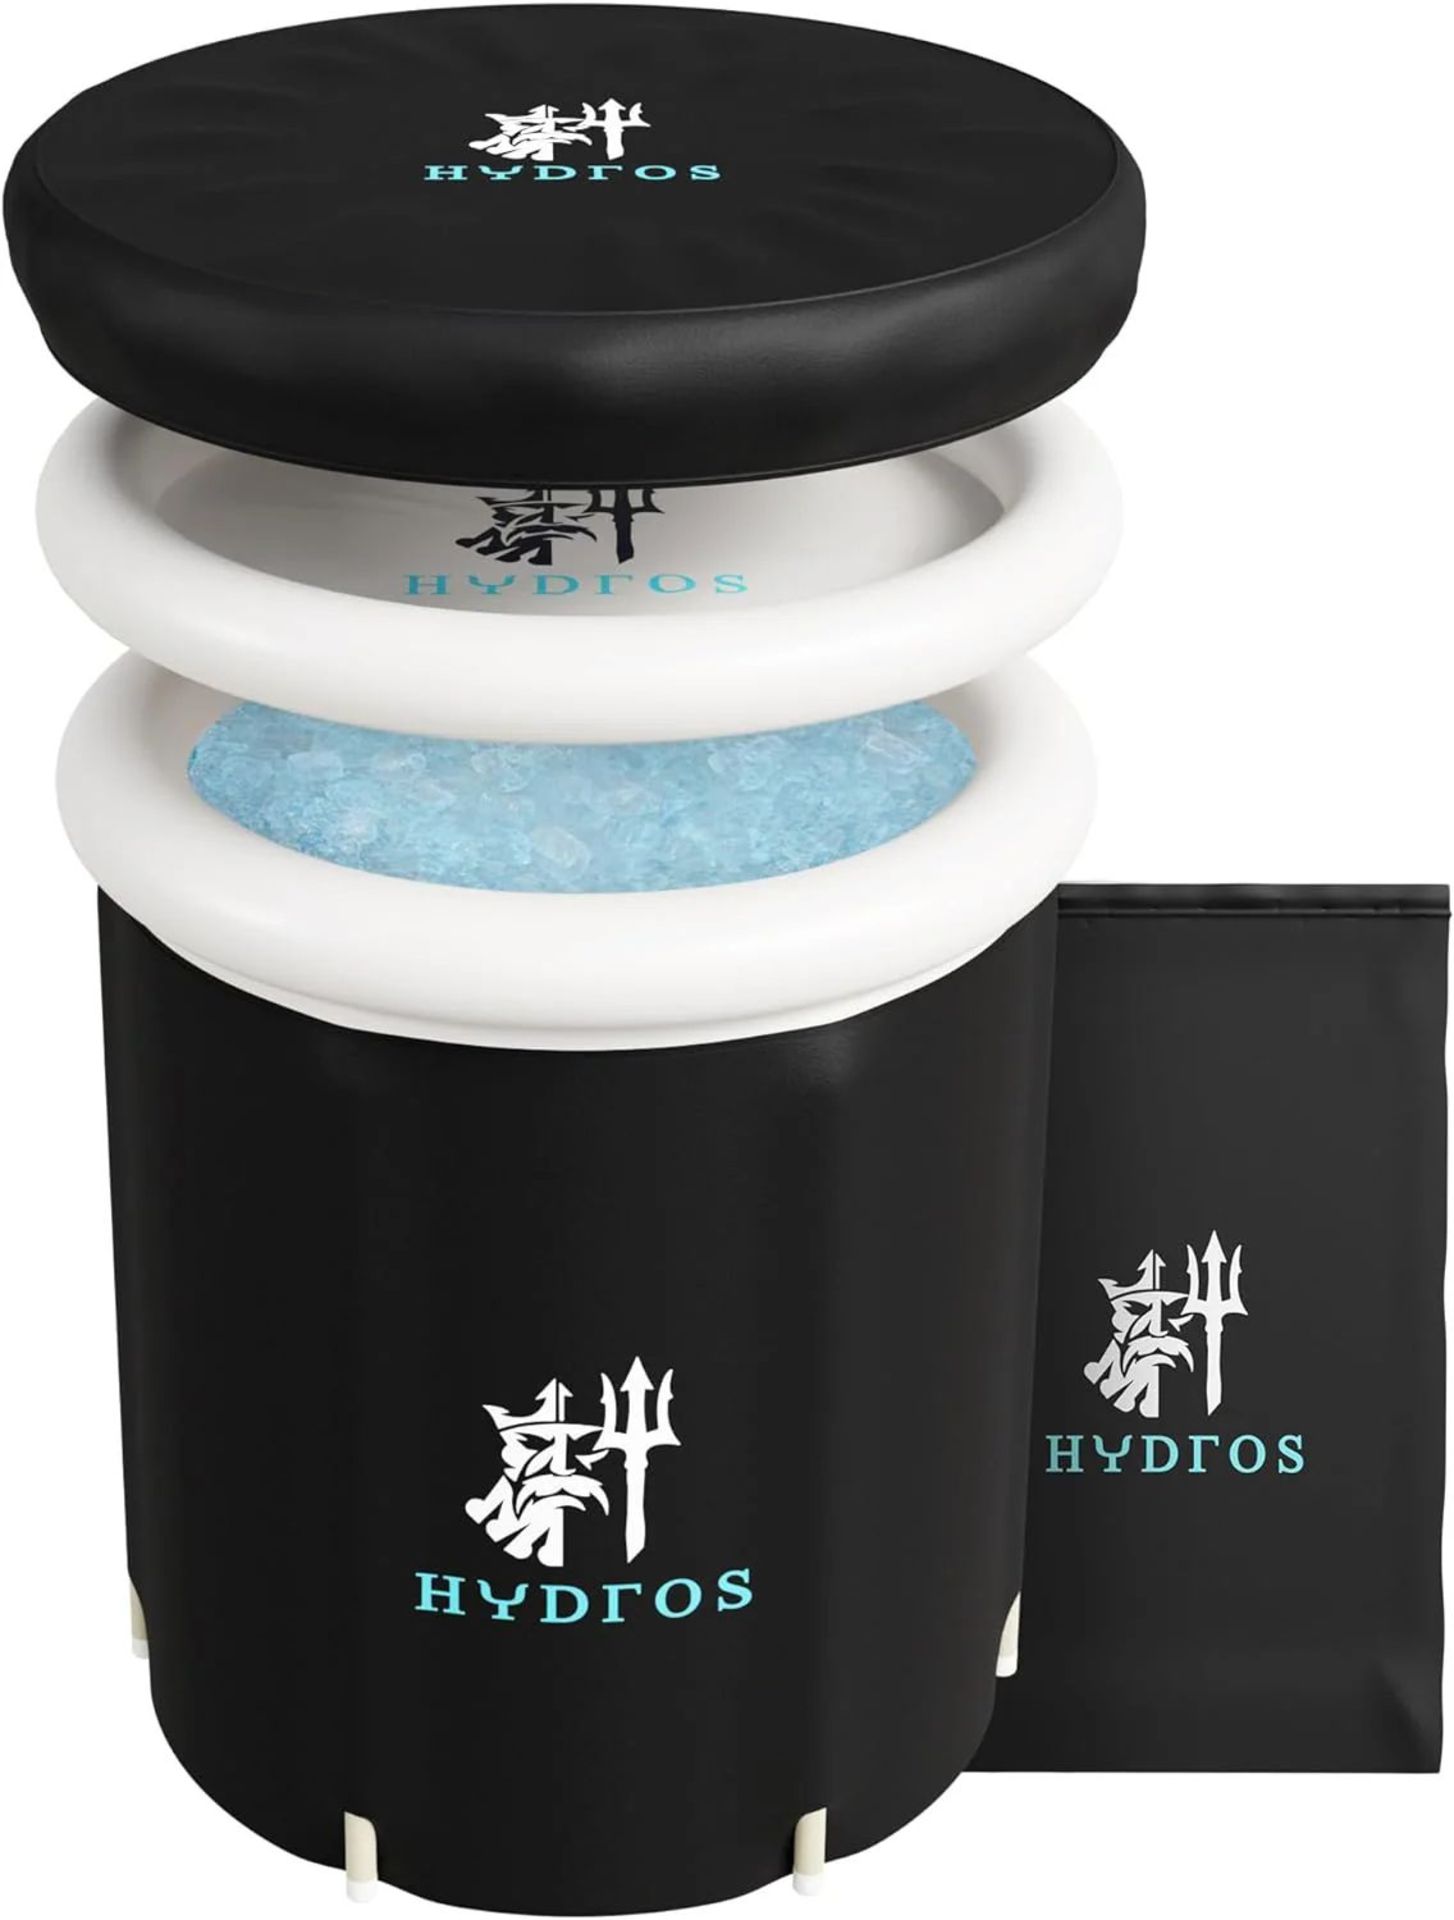 New & Boxed Hydros 320L Ice Plunge Baths. This portable ice bath tub is perfect for athletes looking